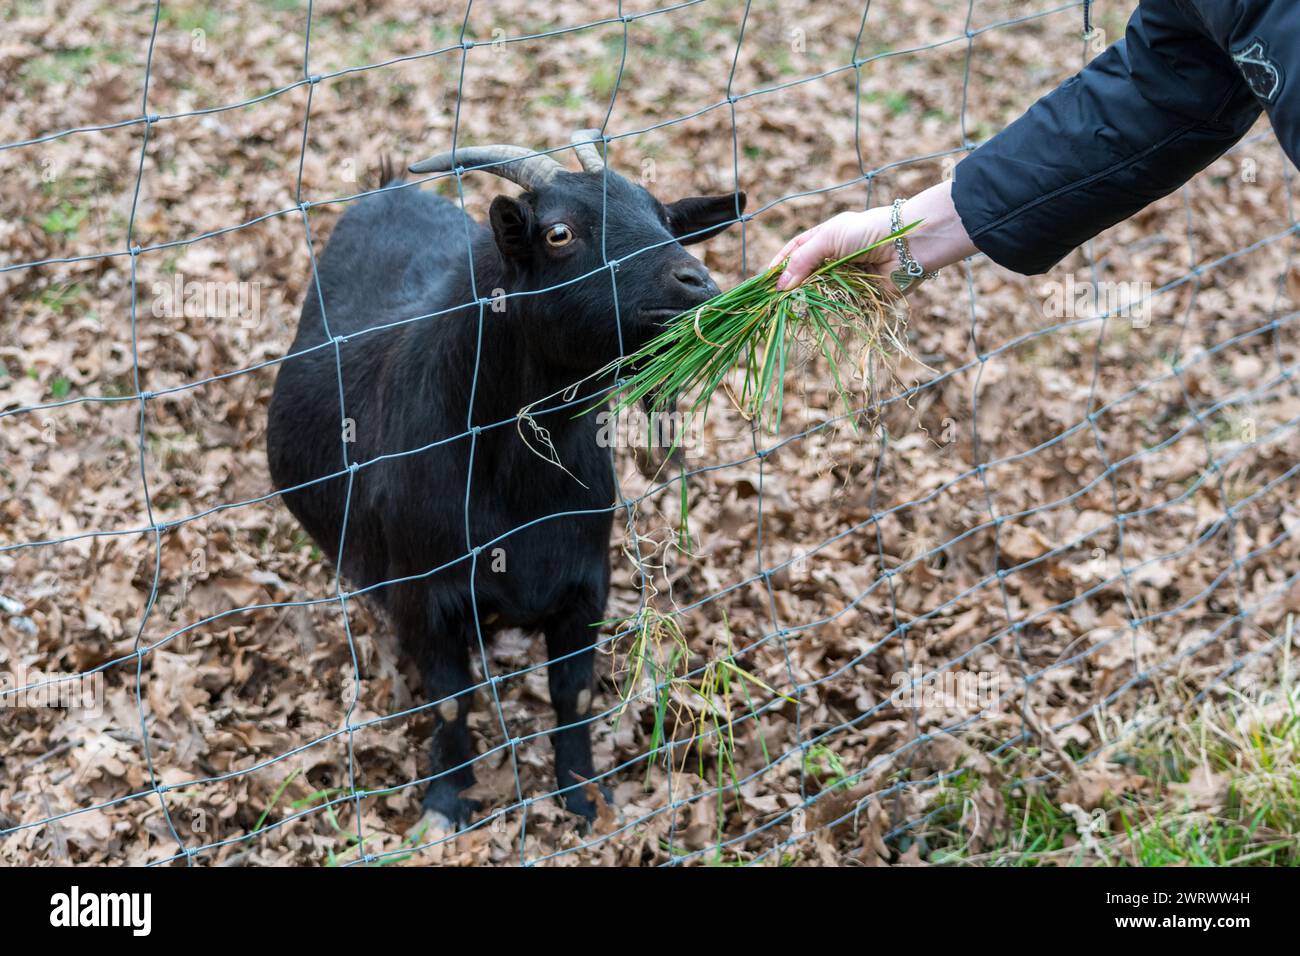 Small black goat in a fence on a farm. The animal approaches the net where a girl feeds it some grass. Stock Photo